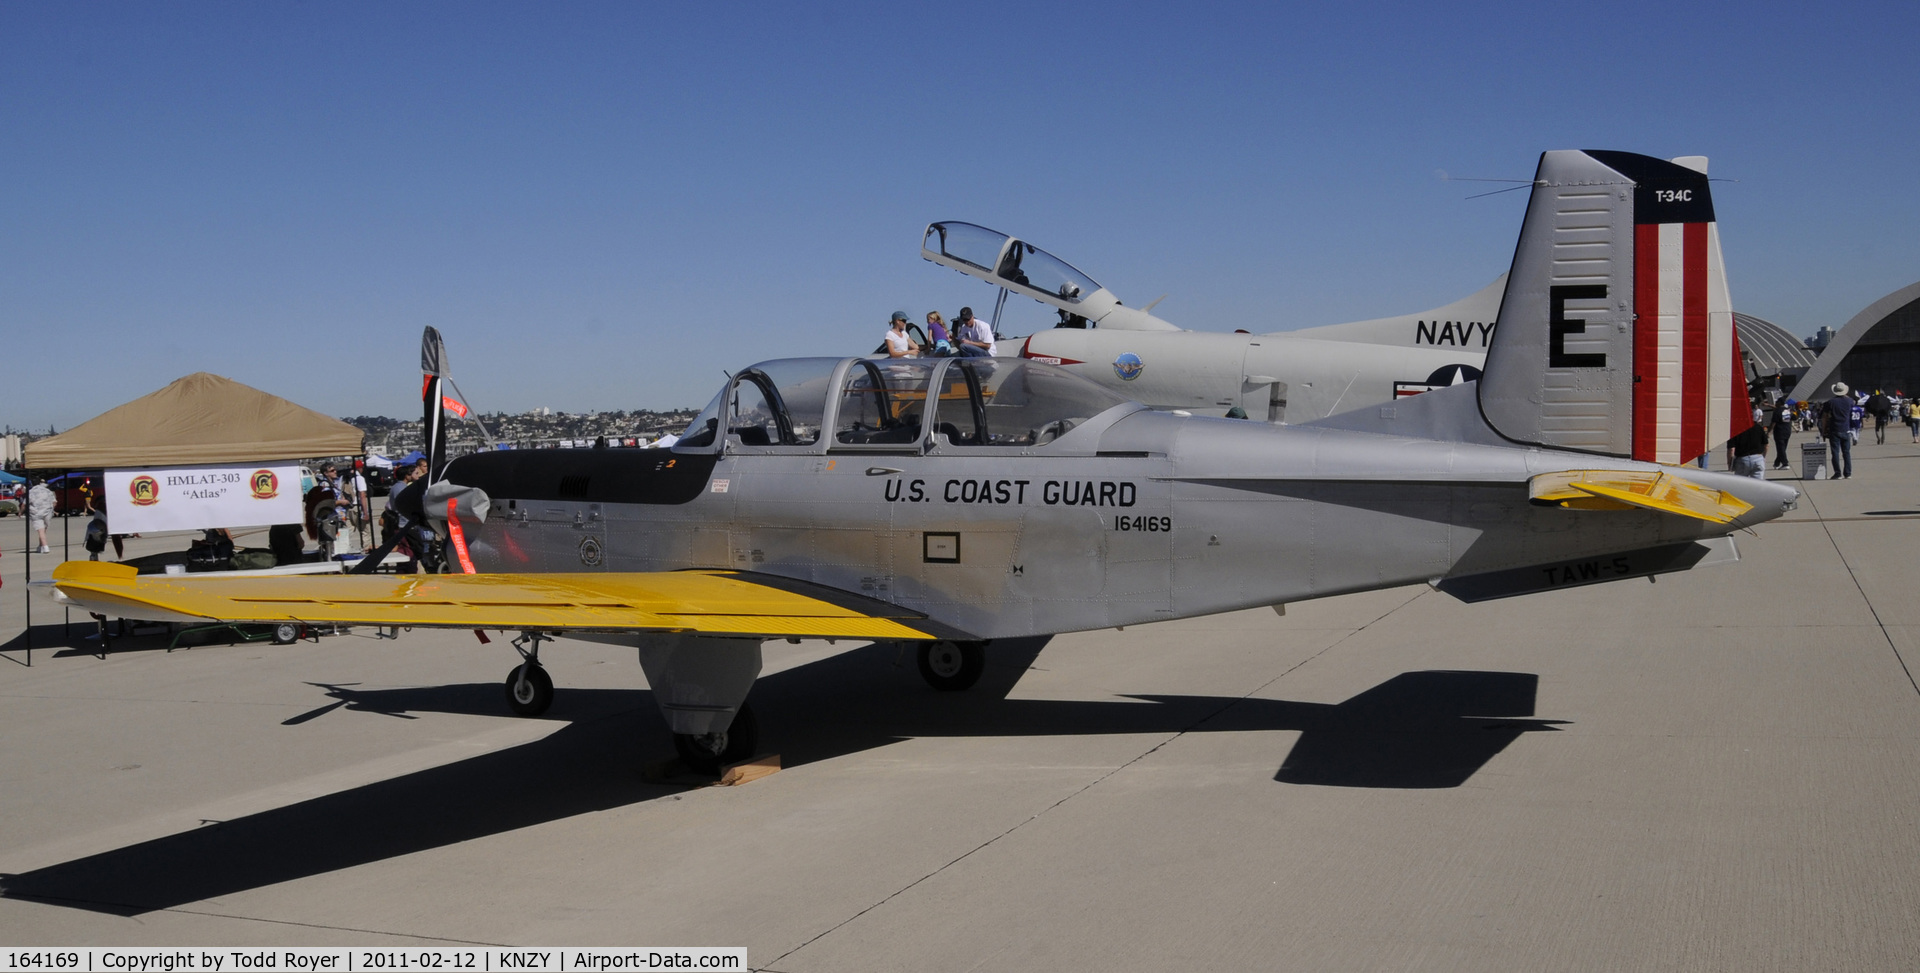 164169, Beech T-34C Turbo Mentor C/N GL-349, Special paint for the Centennial of Naval Aviation